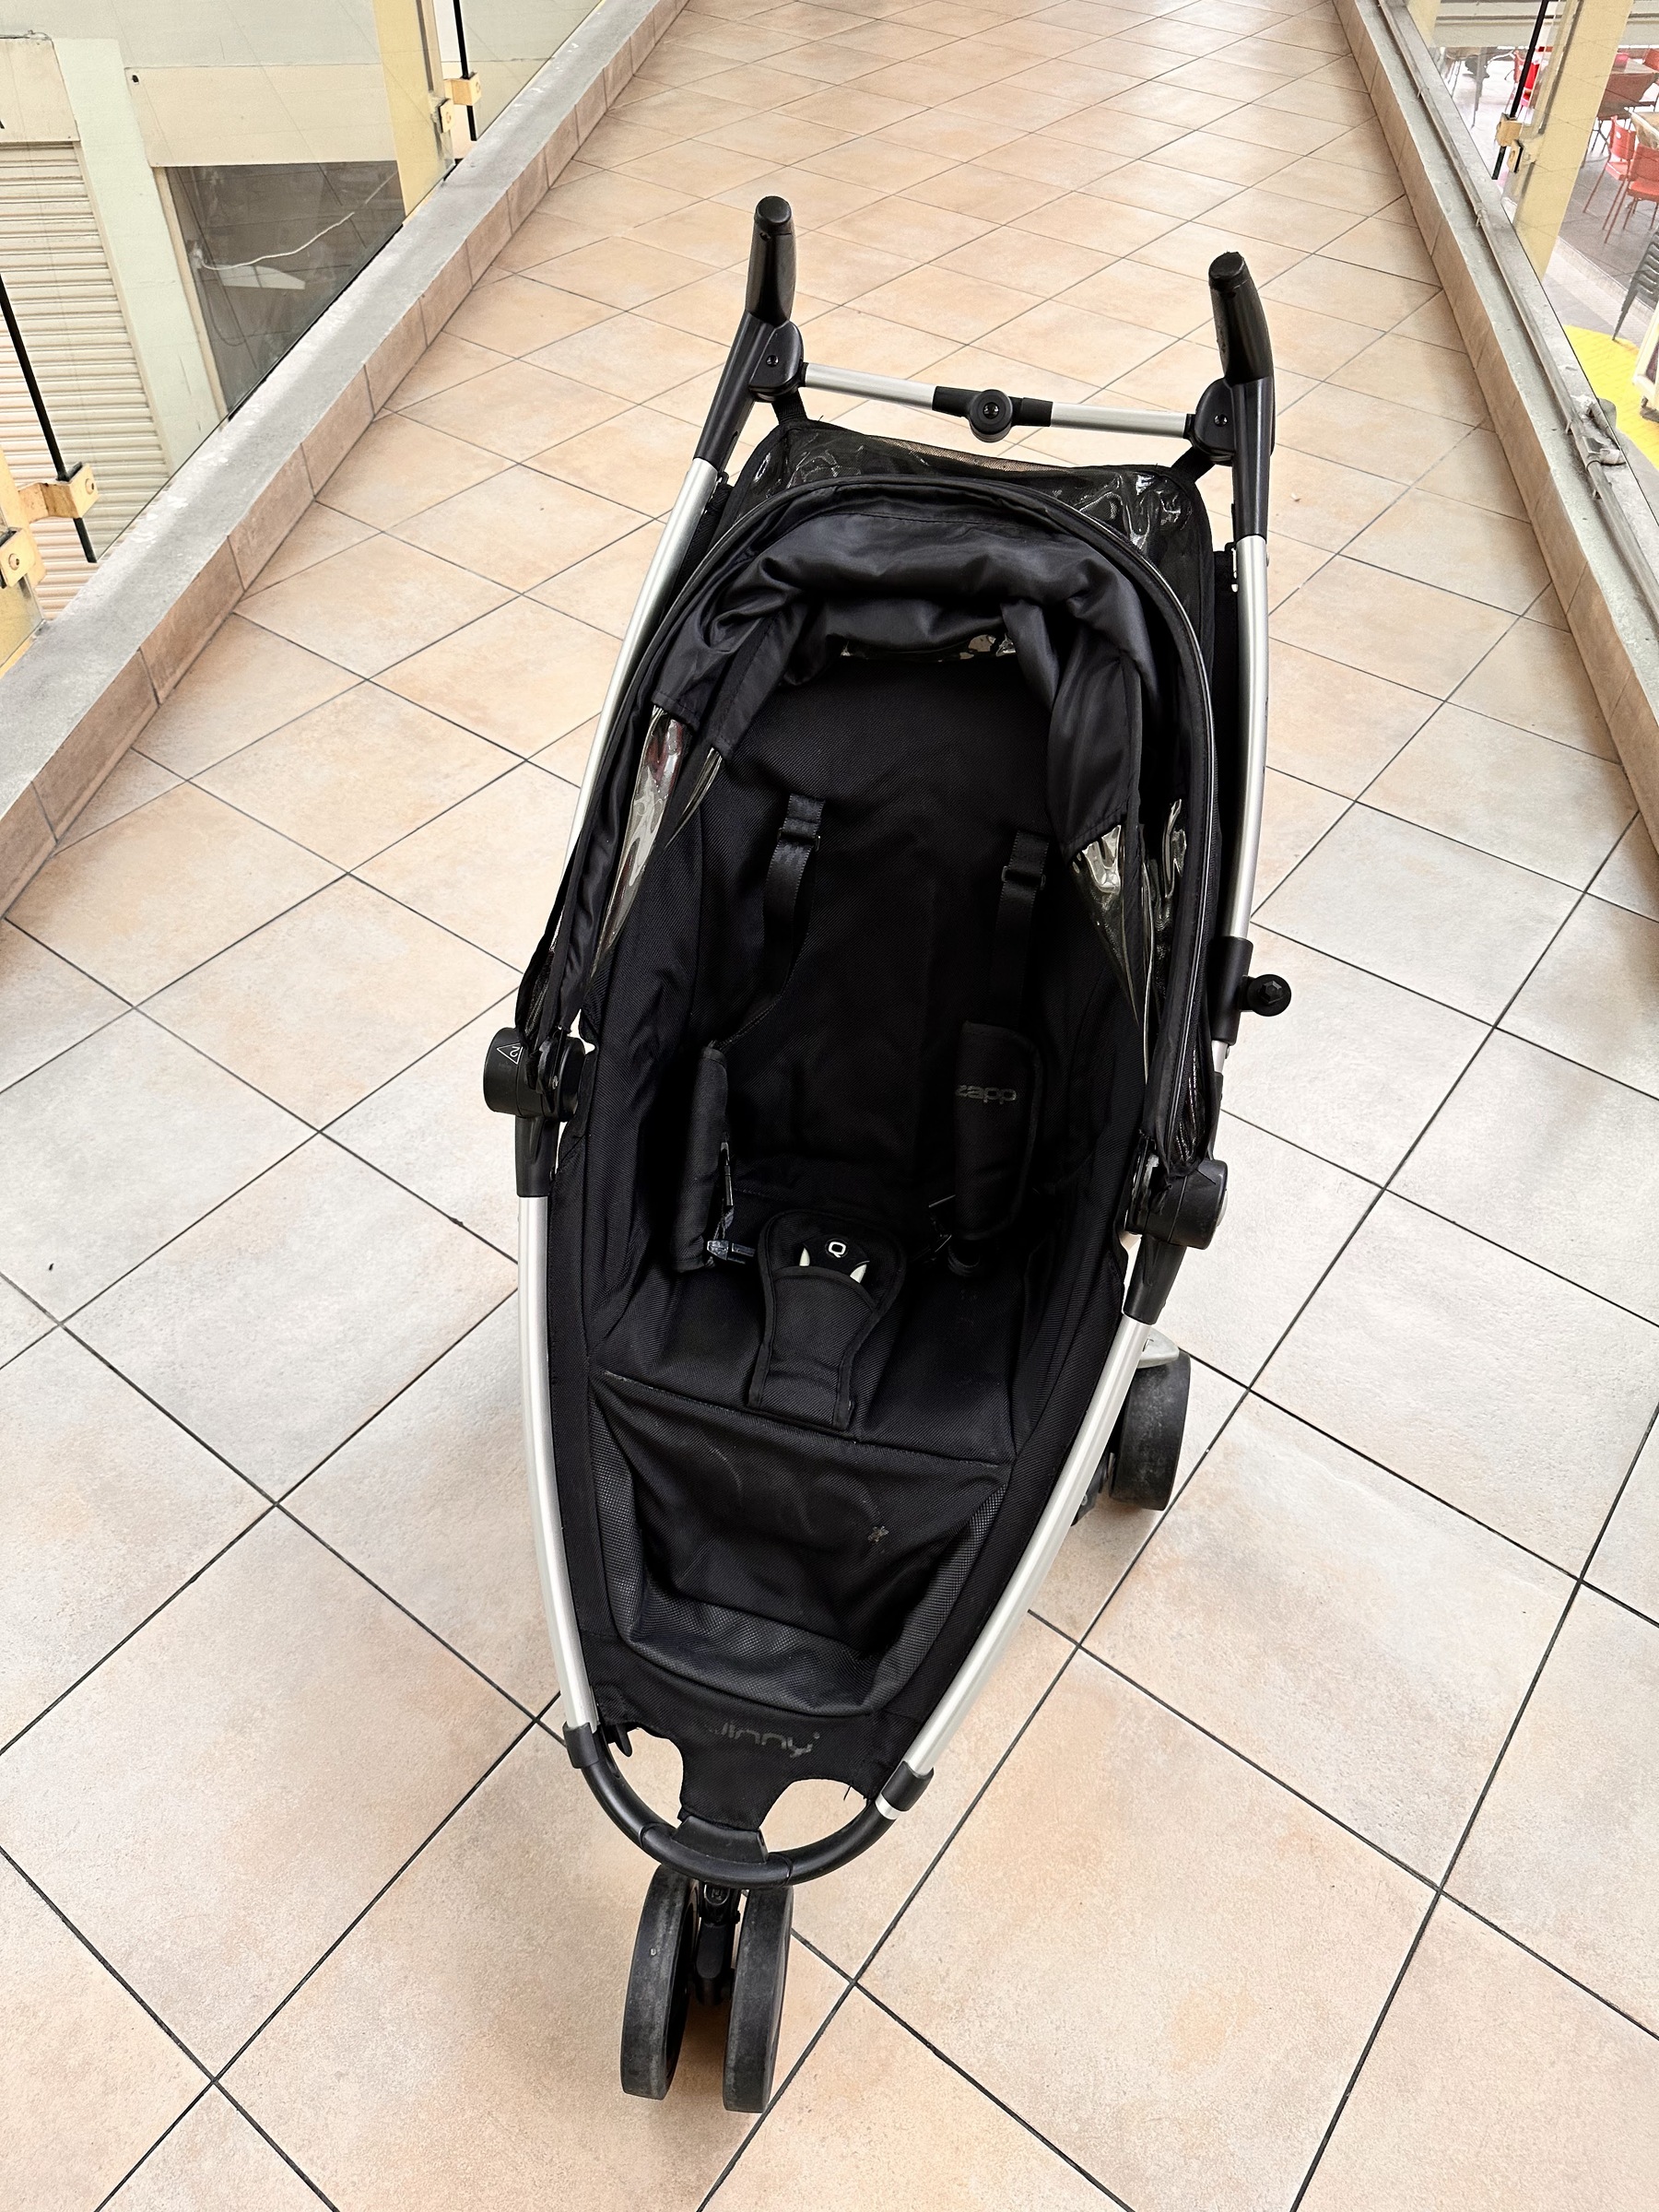 Lightly Used】Quinny Zapp Xtra 2.0 - Dual-Facing Stroller FREE Carrying Bag  – Mikali - your one stop baby stuff solutions